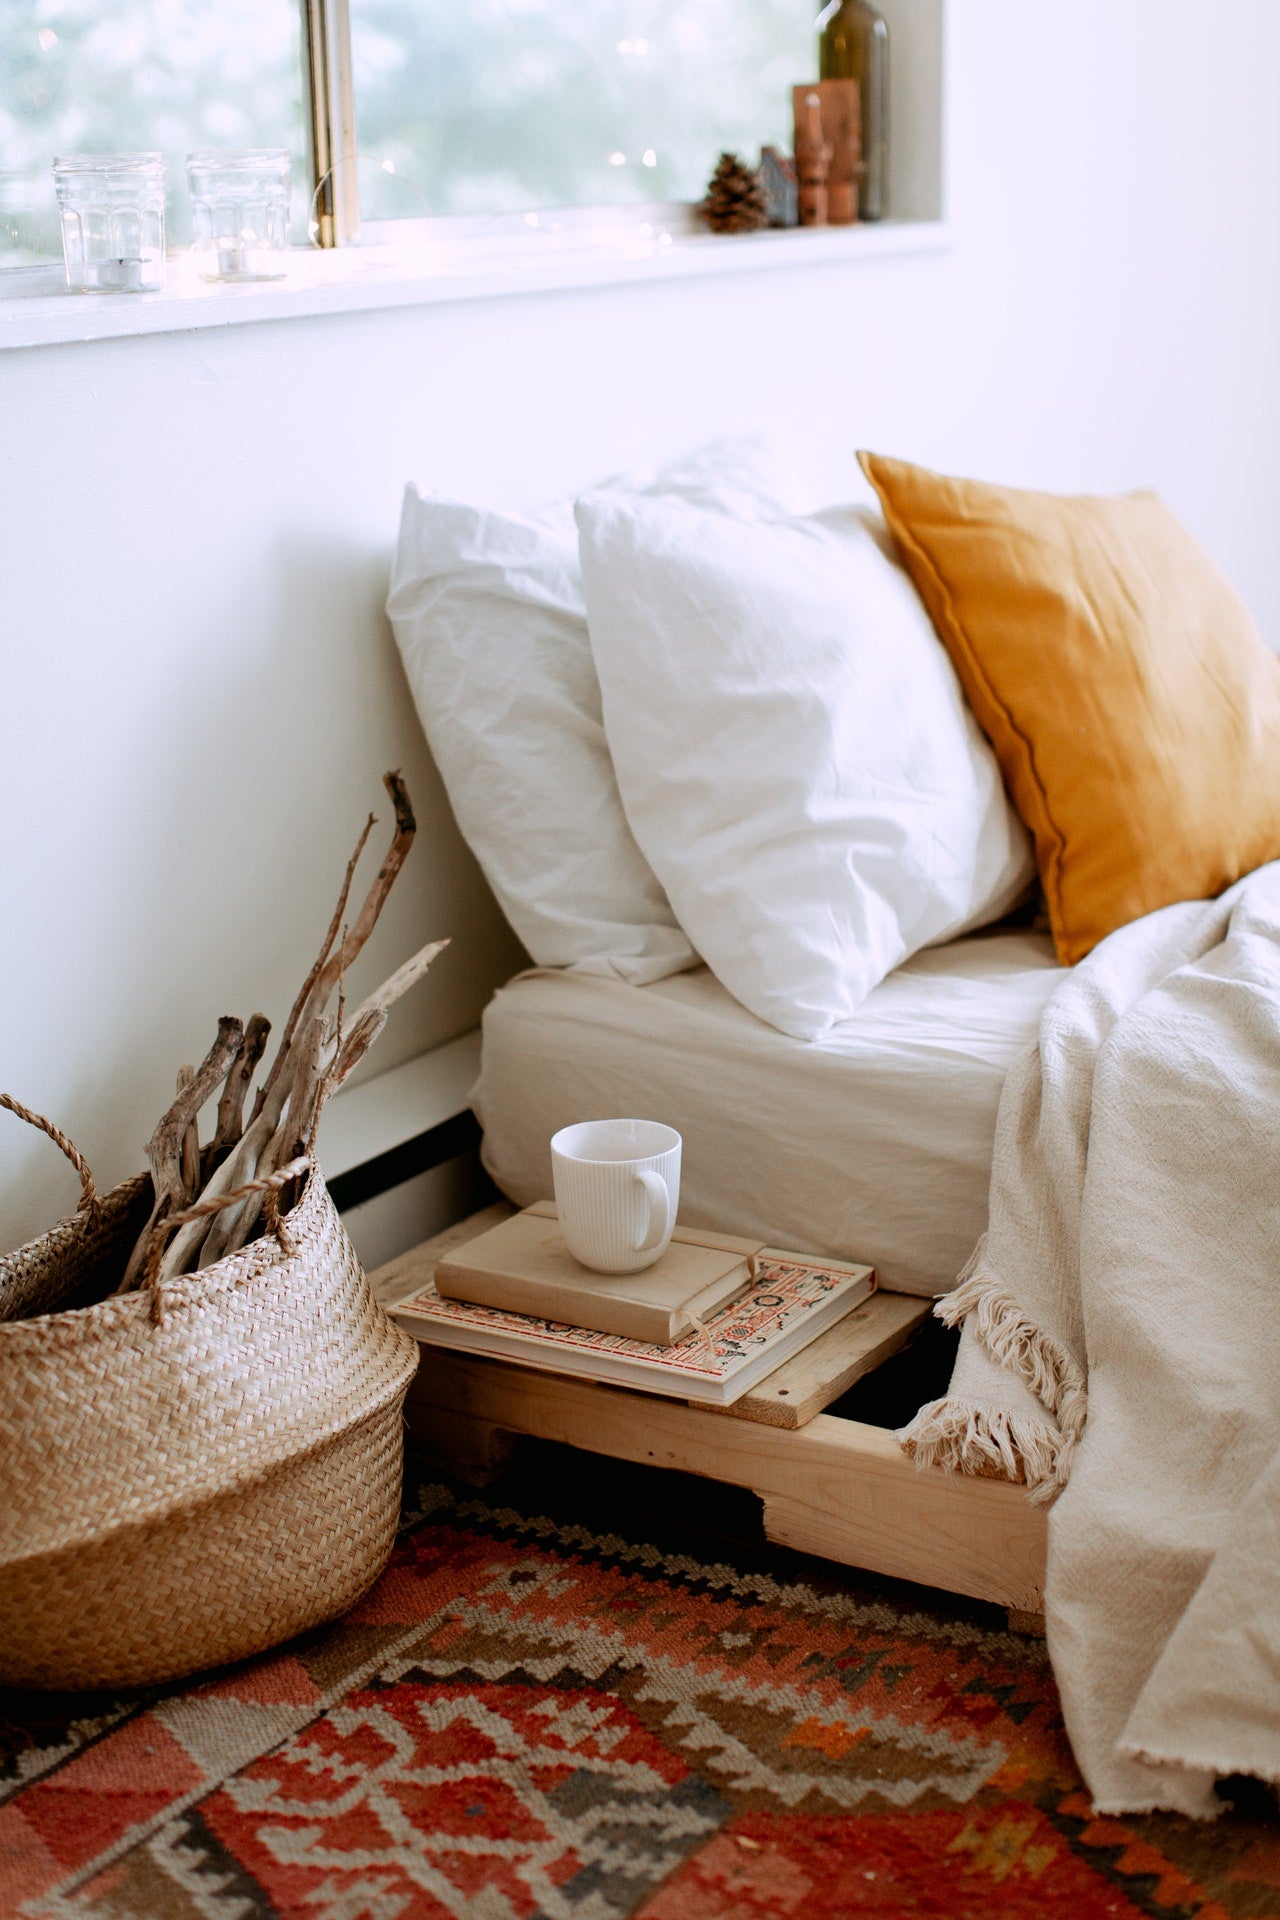 A cozy boho bed with a tea cup and a basket of sticks next to it.